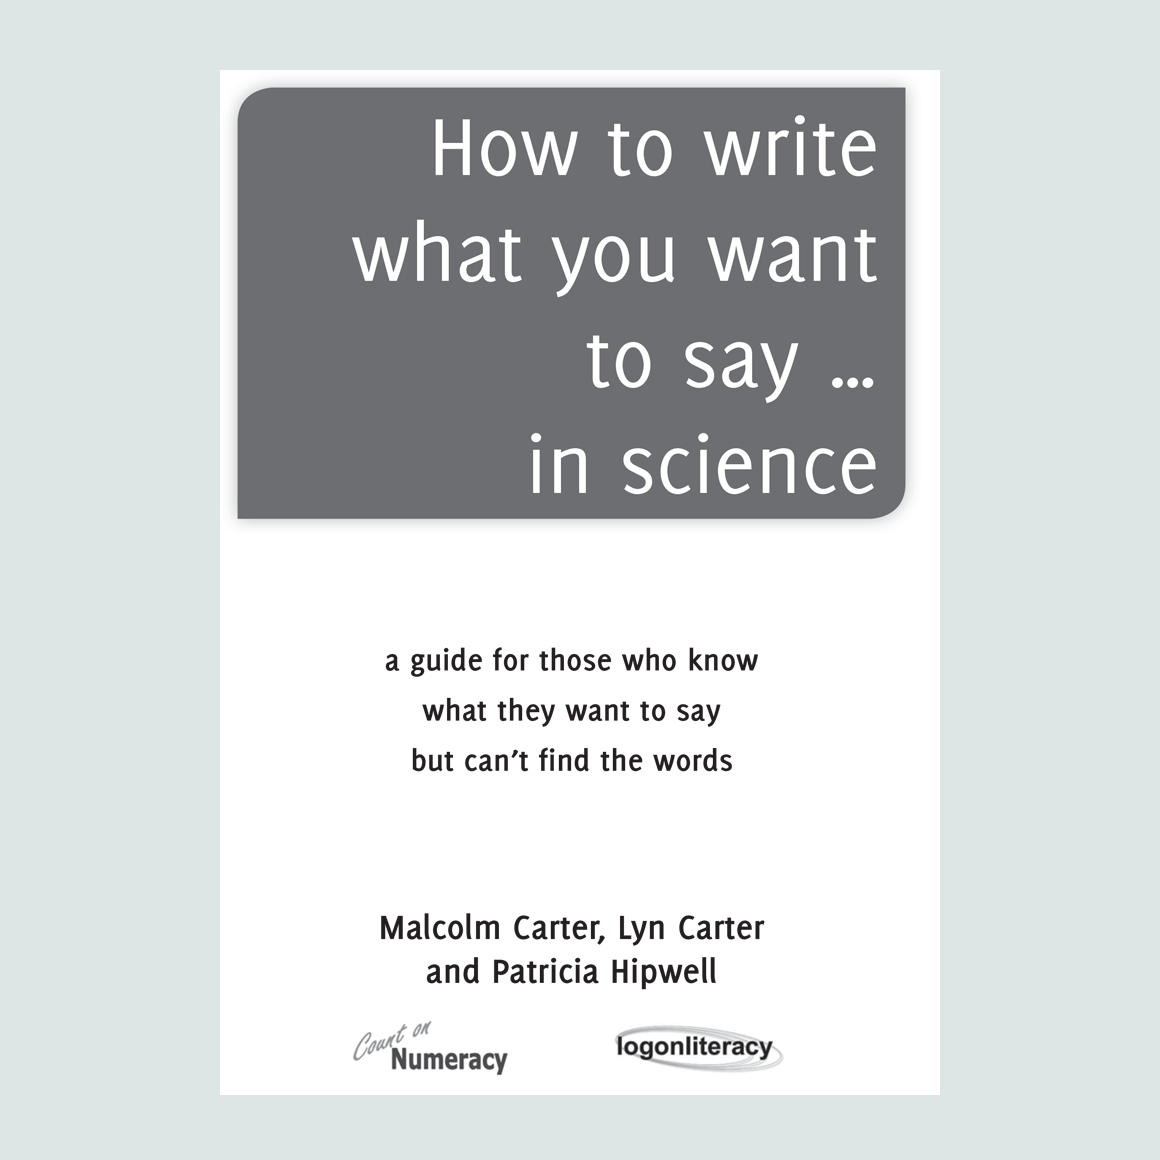 How to write what you want to say... in science